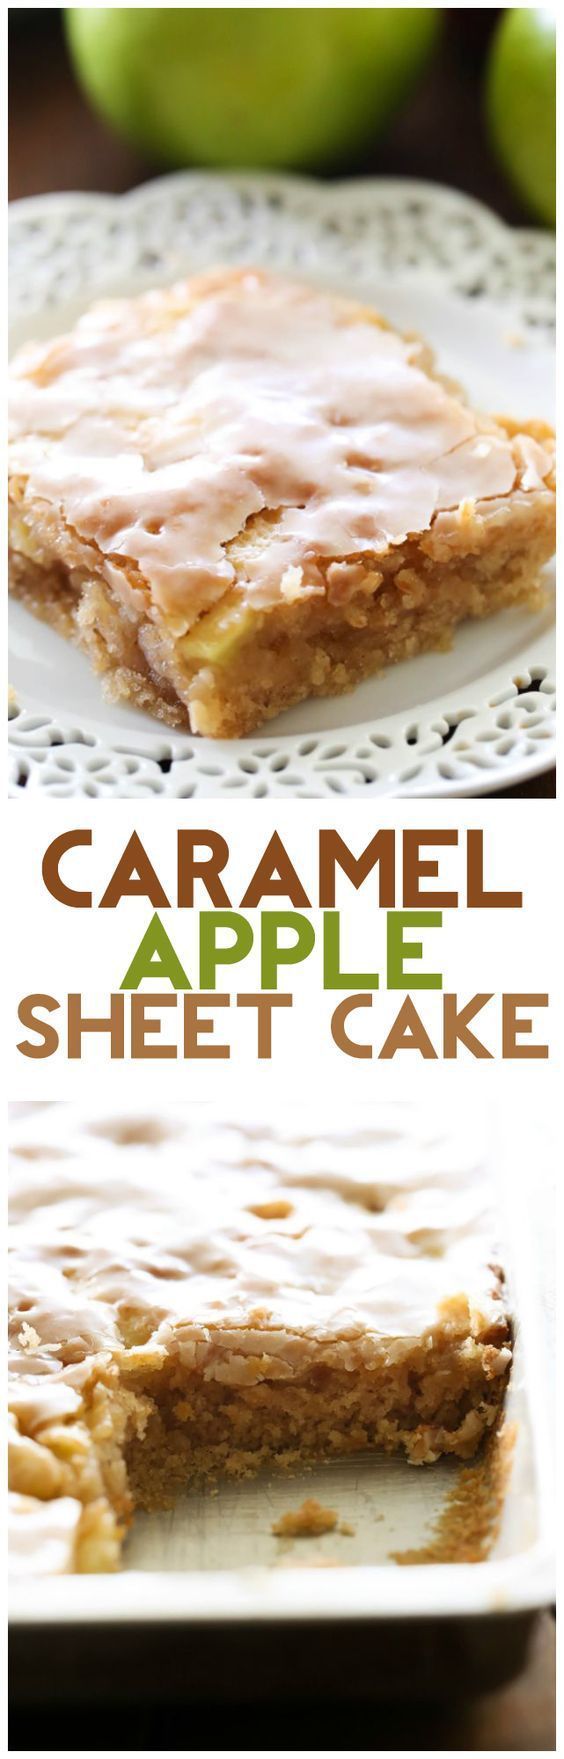 Caramel Apple Sheet Cake Recipe via Chef in Training … this cake is perfectly moist and has caramel frosting infused in each and